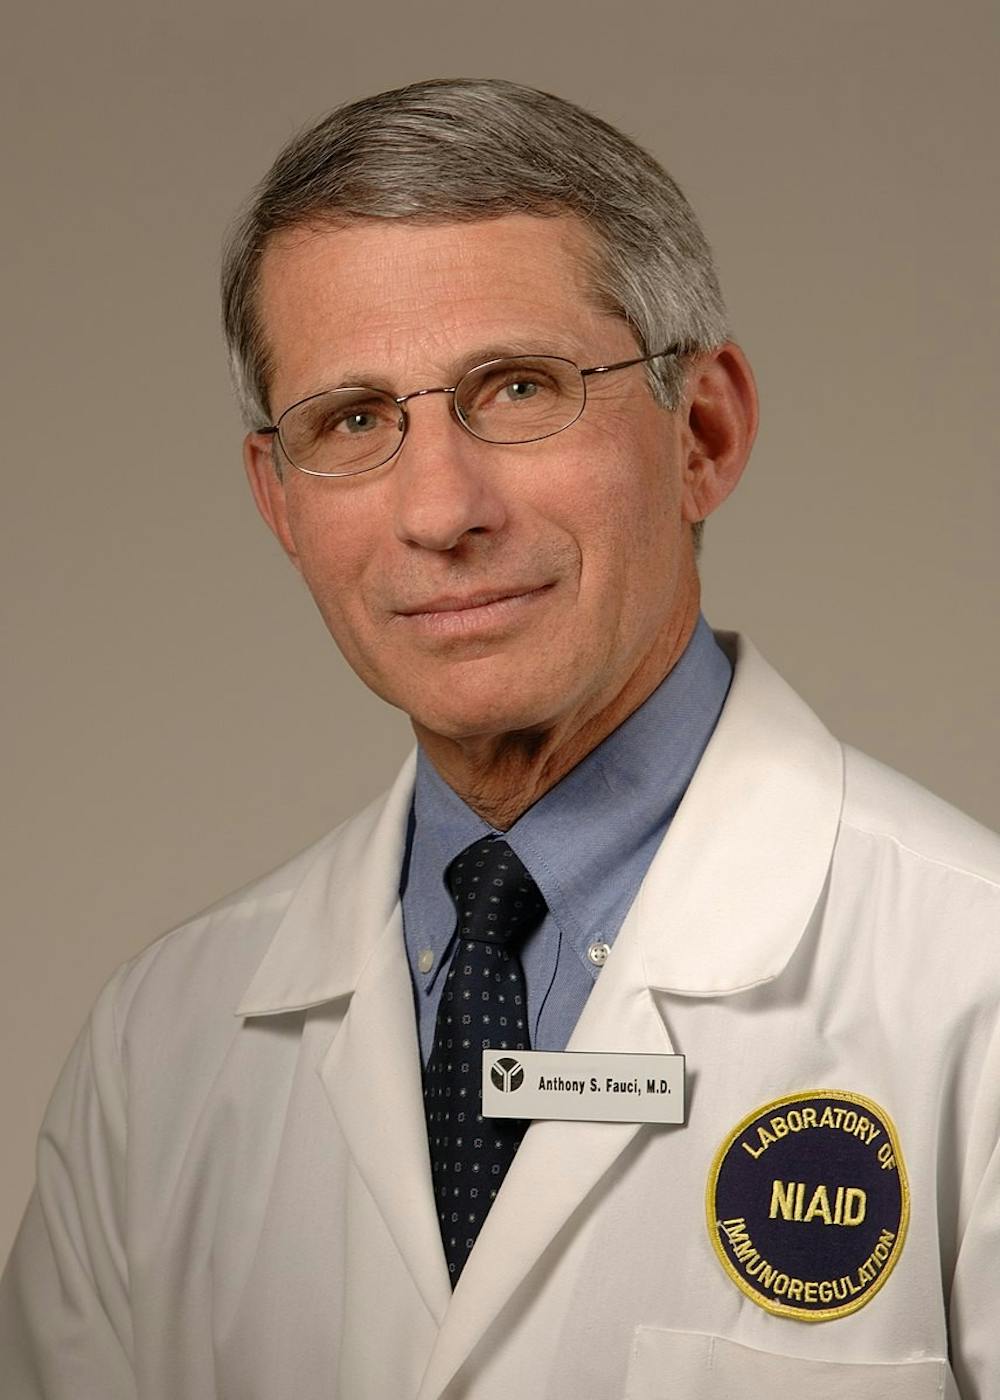 <h6>“Anthony S. Fauci, M.D., NIAID Director” by NIAID / <a href="https://commons.wikimedia.org/wiki/File:Anthony_S._Fauci,_M.D.,_NIAID_Director_(26759498706).jpg" target="_self">CC BY 2.0</a></h6>